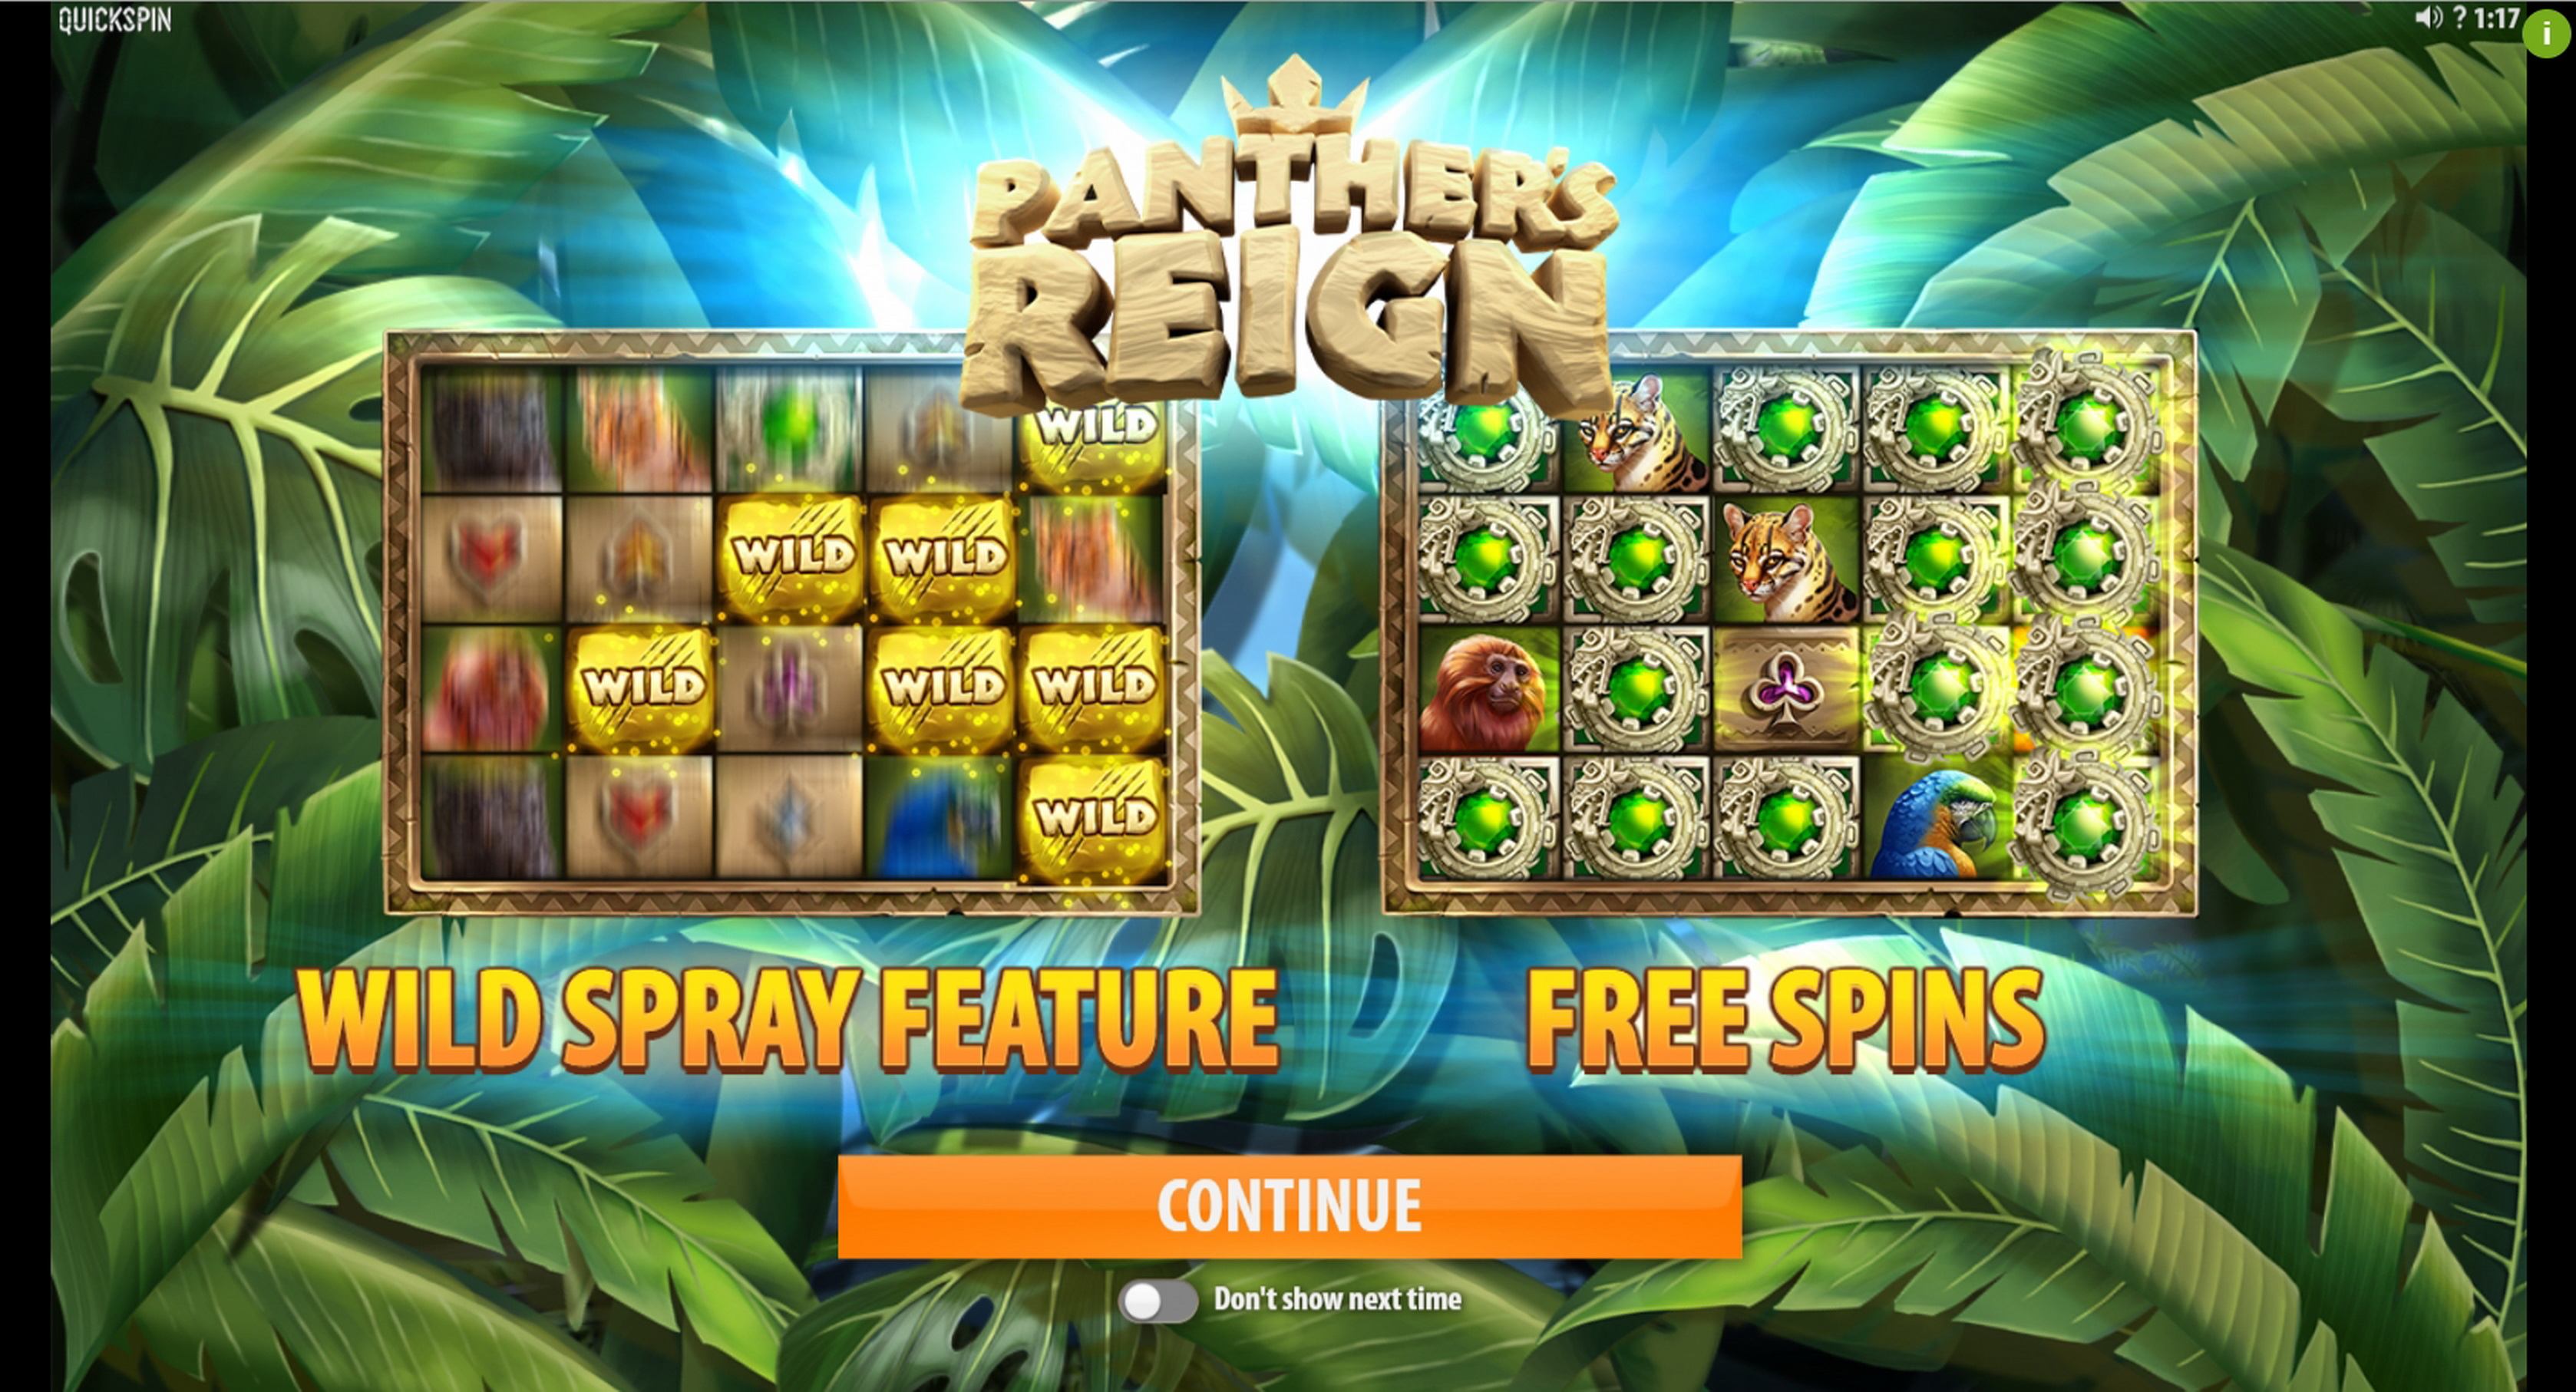 Play Panthers Reign Free Casino Slot Game by Quickspin